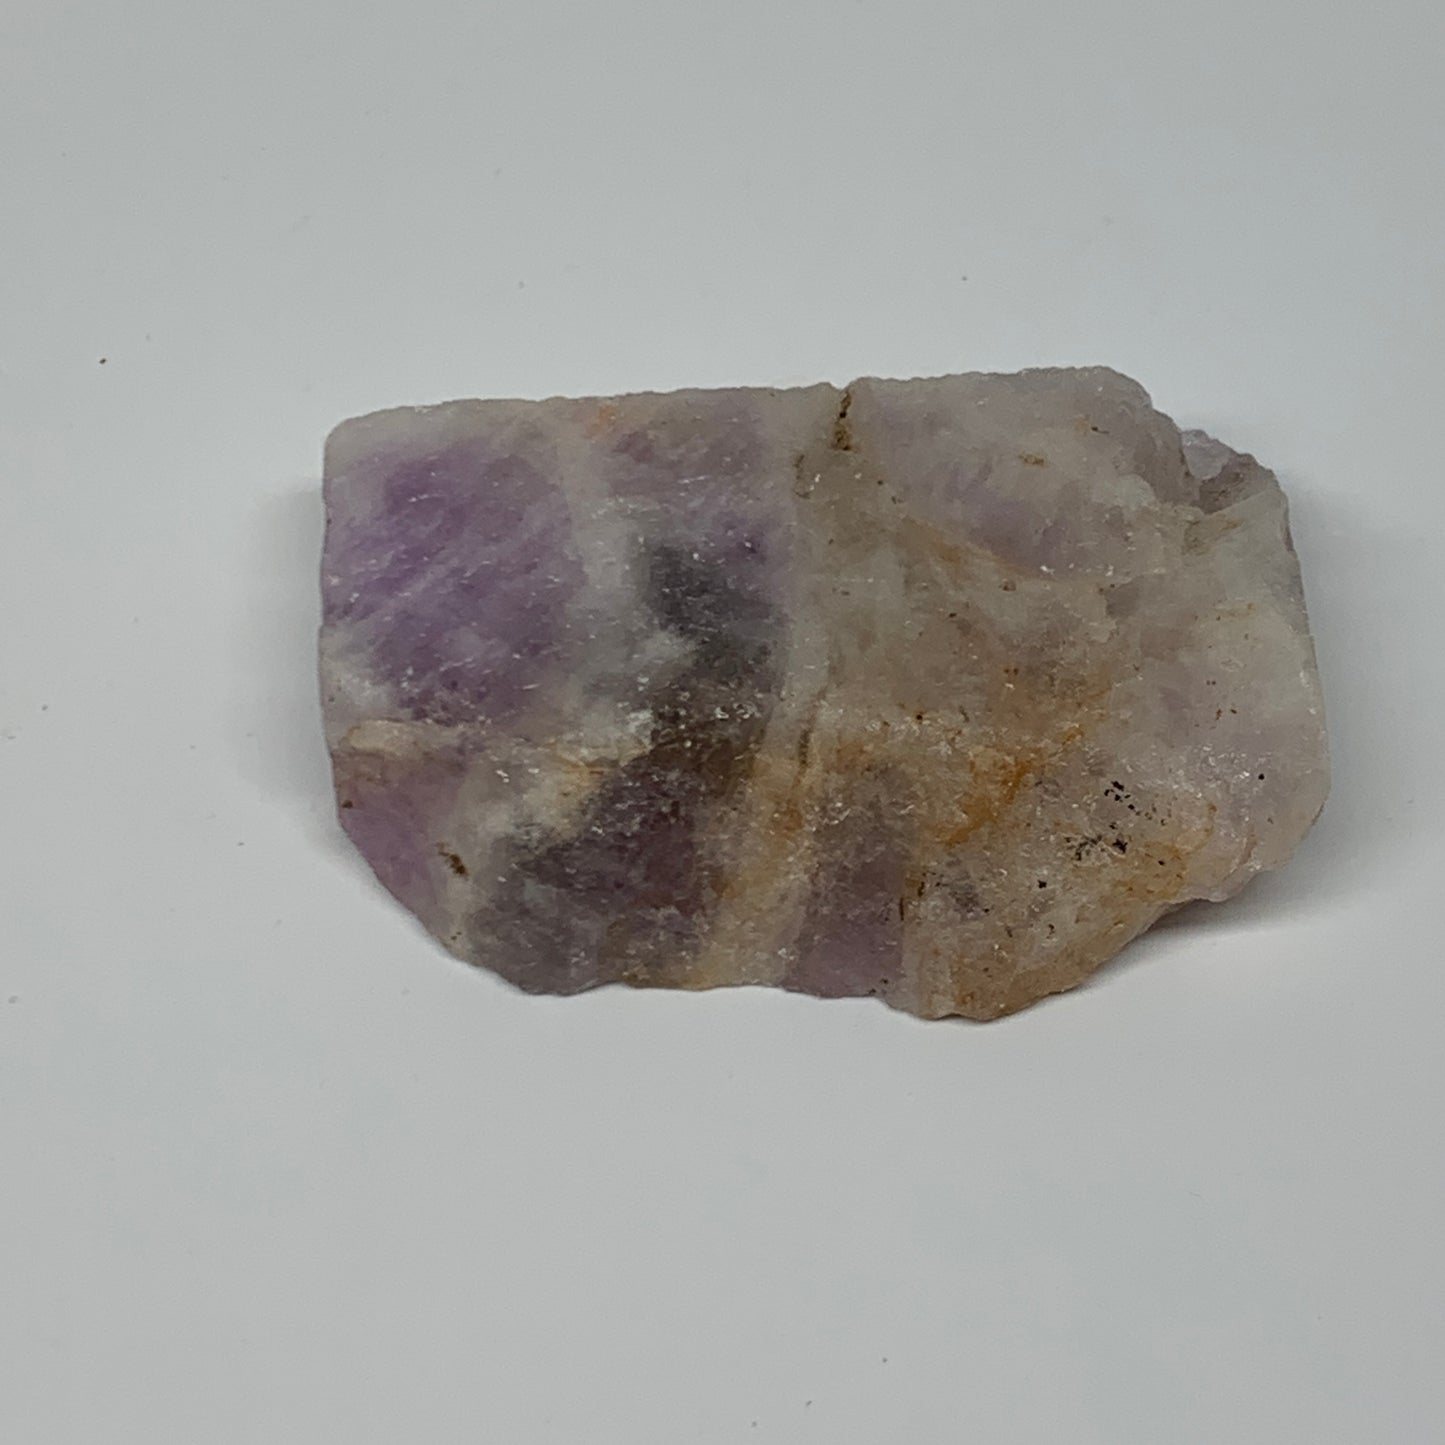 69.7g, 2.5"x1.7"x0.5", One face polished Banned Amethyst, One face semi polished